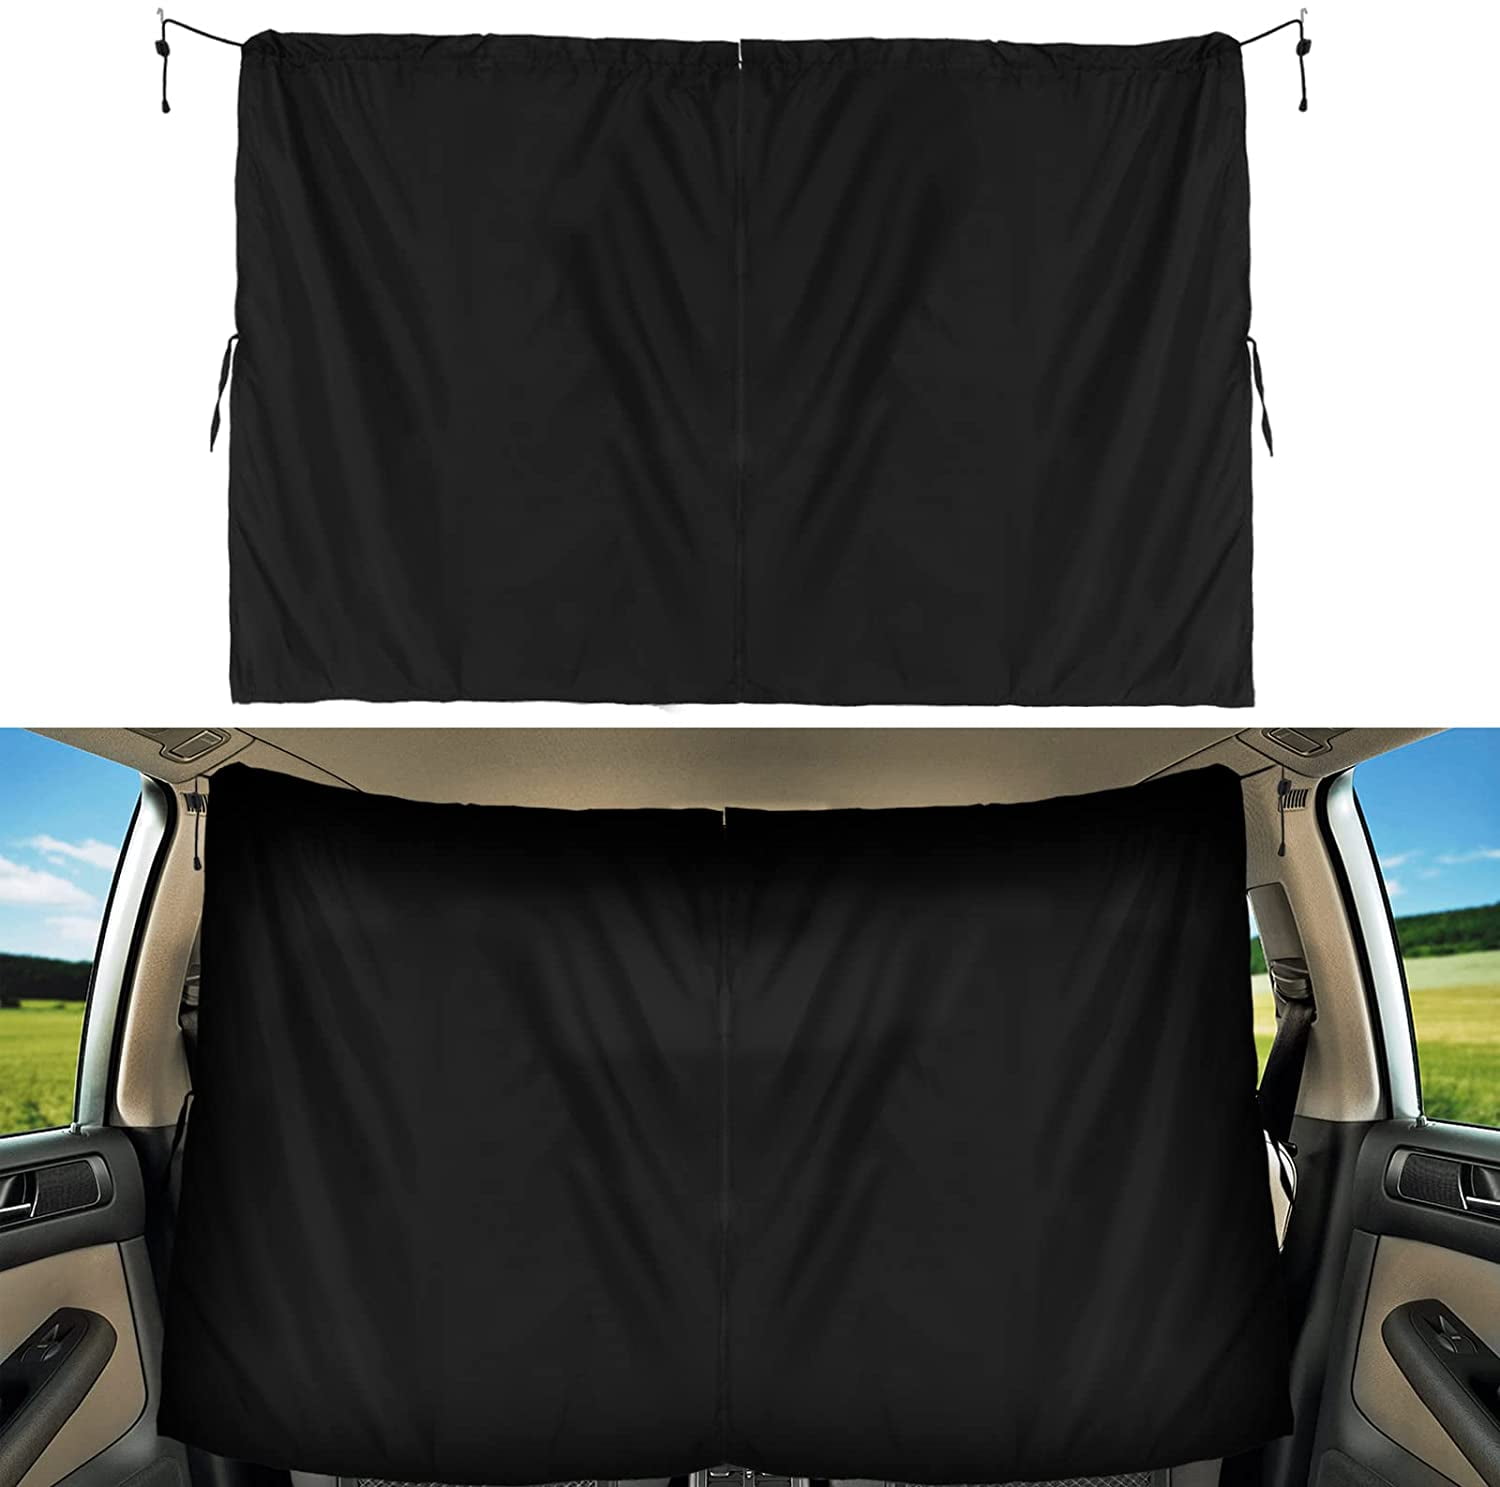 Car Divider Privacy Curtains Sun Shade Covers, Black Detachable Car Divider  Screen Partition Curtain, Rear Seats Privacy Protection Curtains for Car